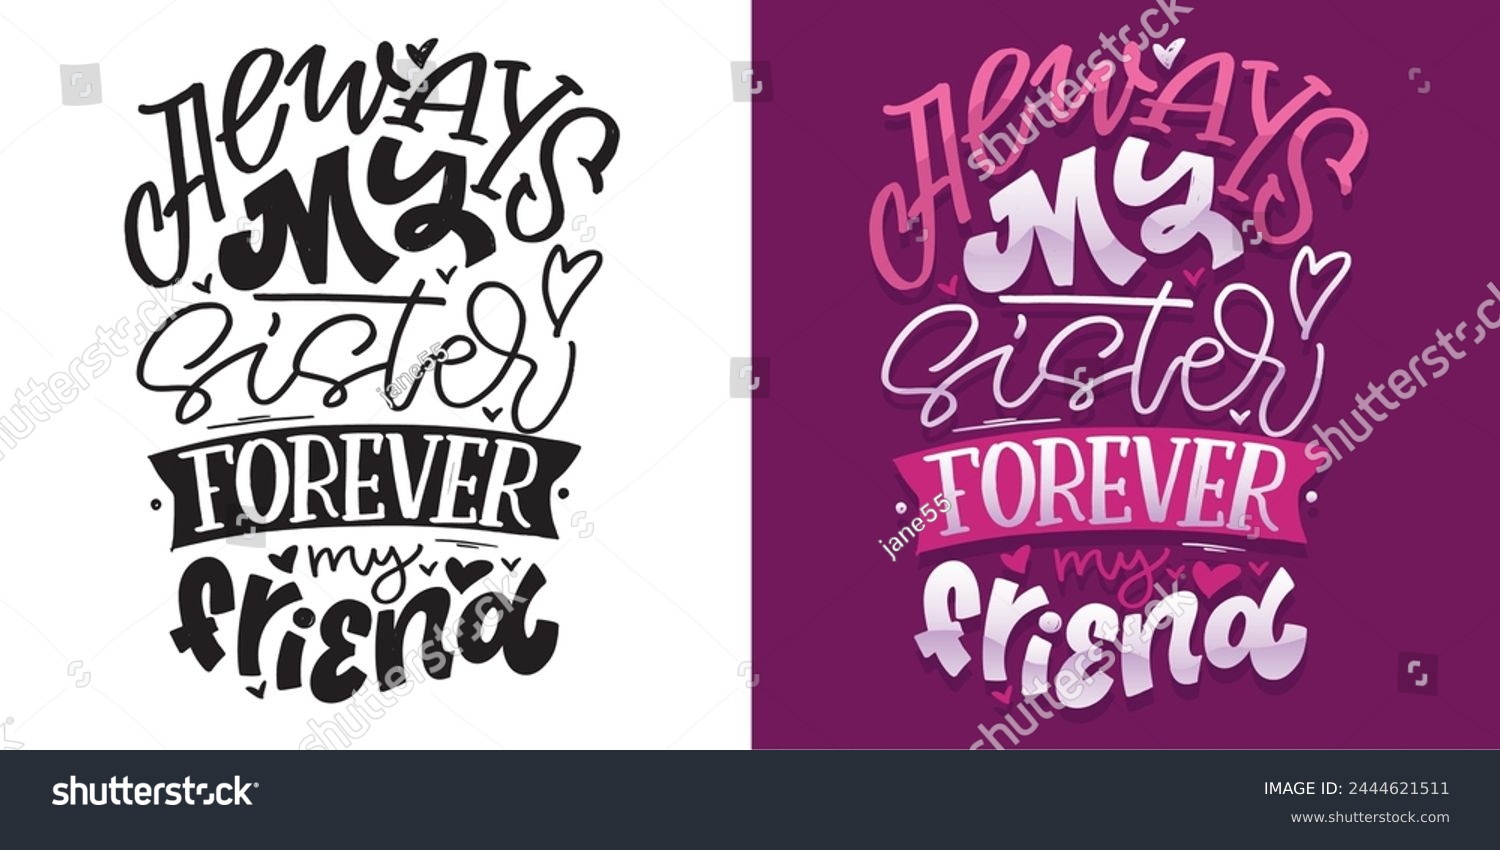 SVG of Funny hand drawn doodle lettering quote about sisters. Lettering print t-shirt design. 100% vector file. svg